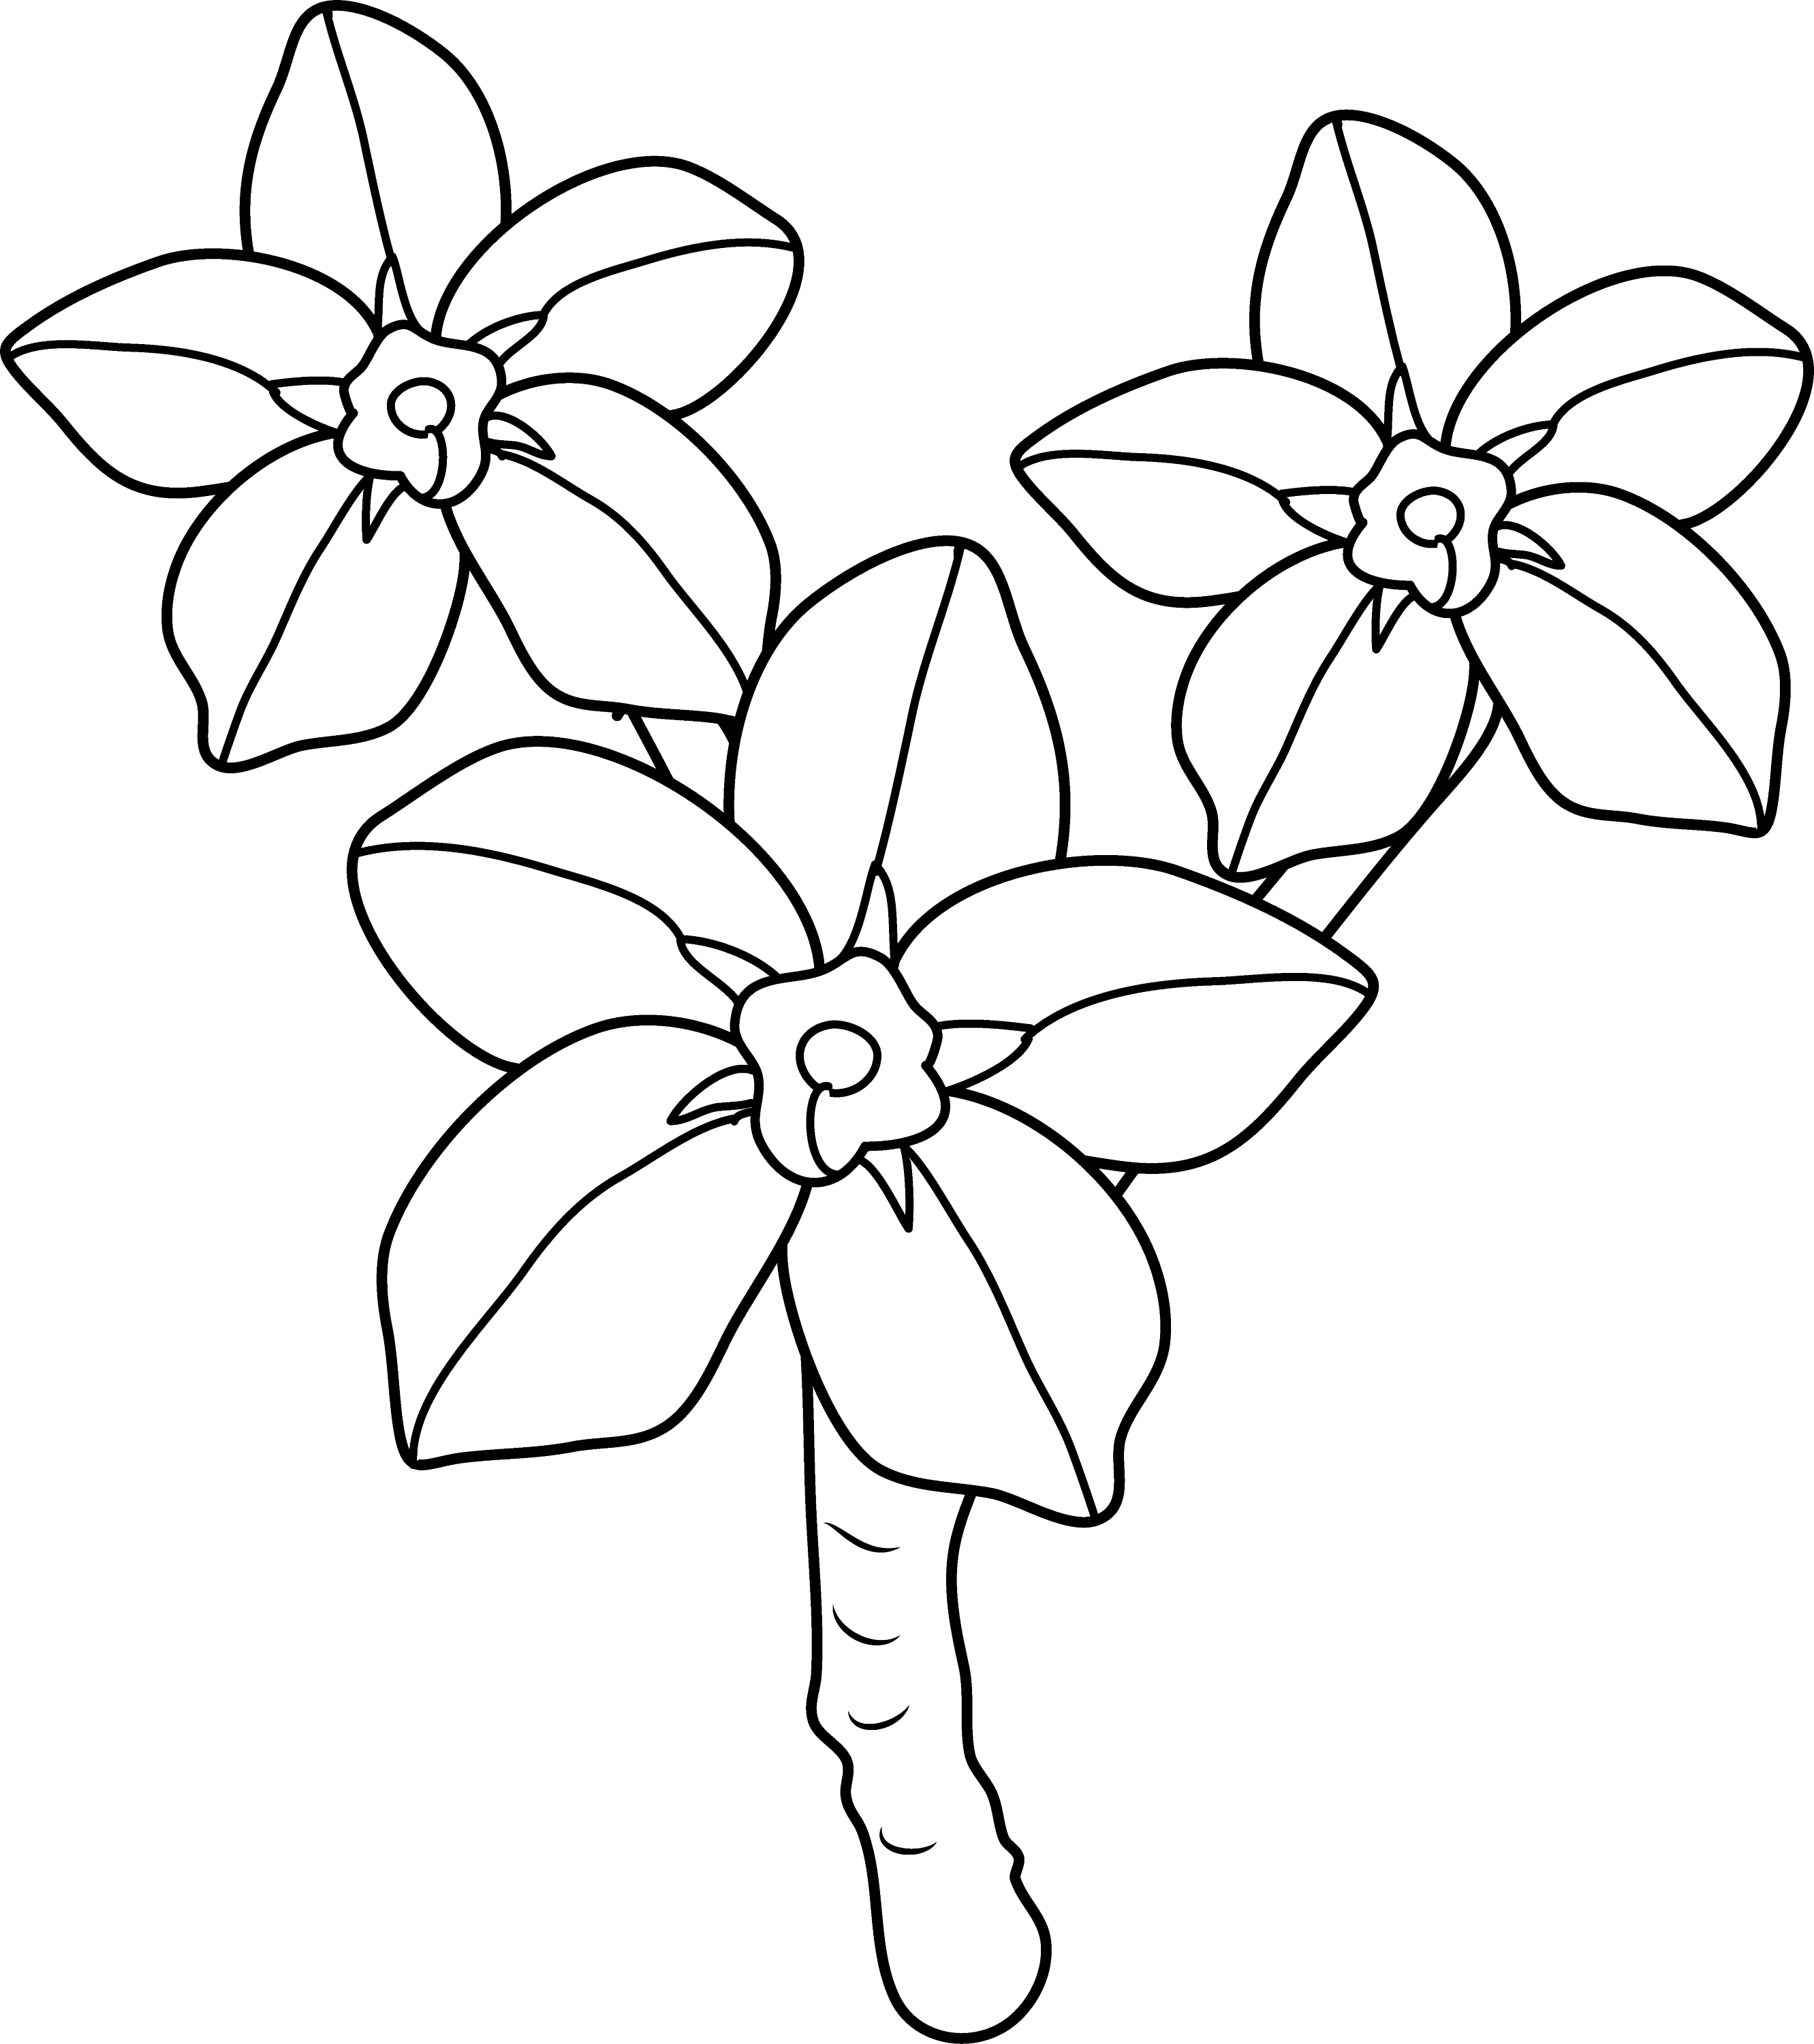 Forget Me Nots Coloring Page - Free Clip Art